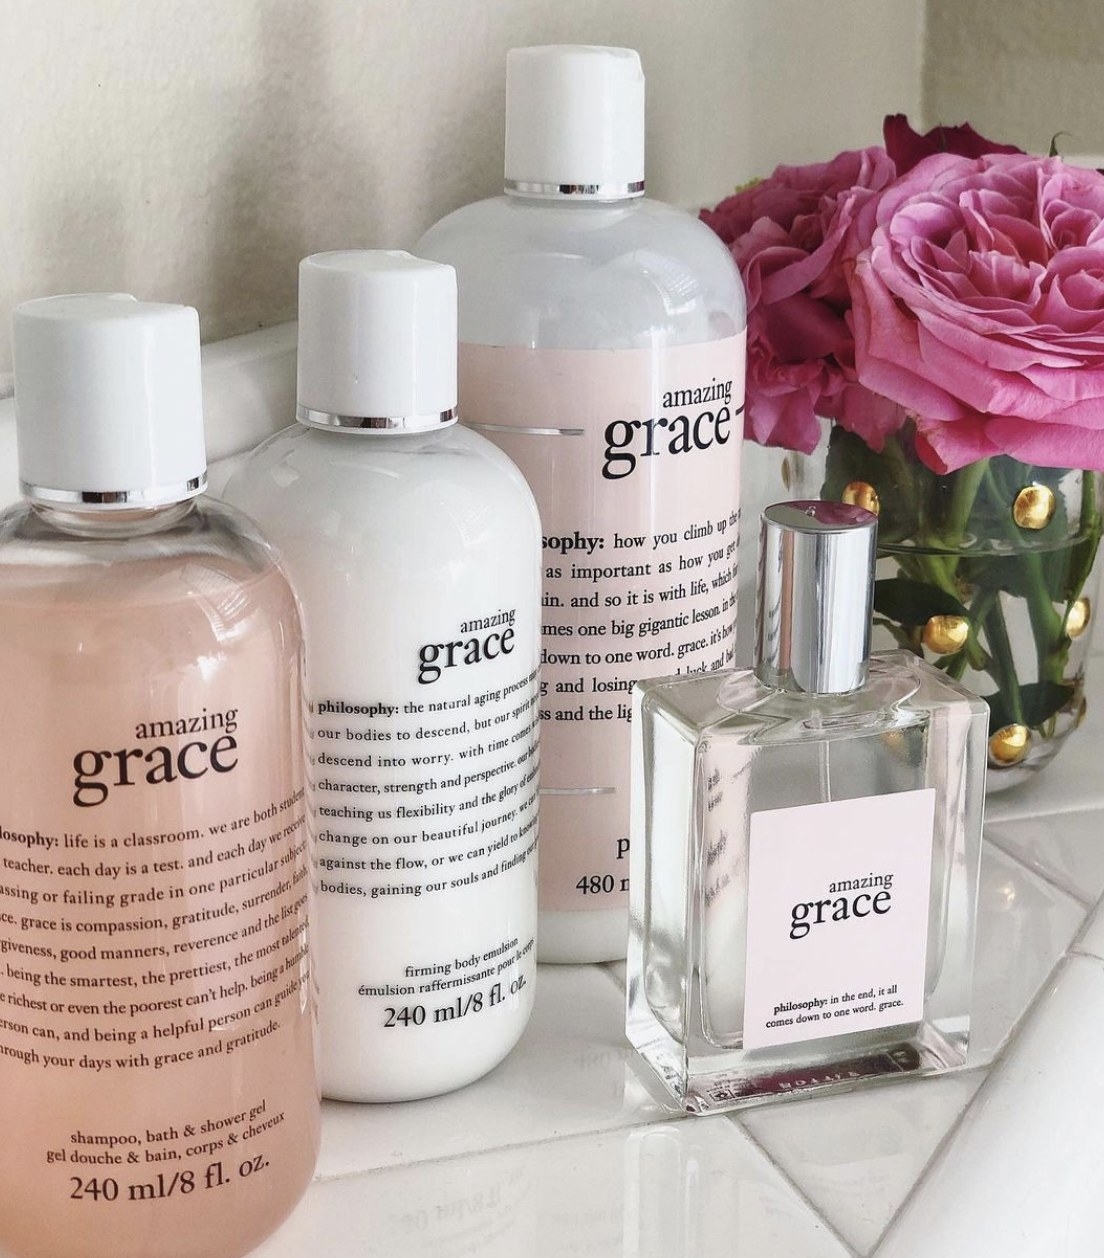 The amazing grace collection including the firming body lotion, shower gel and more